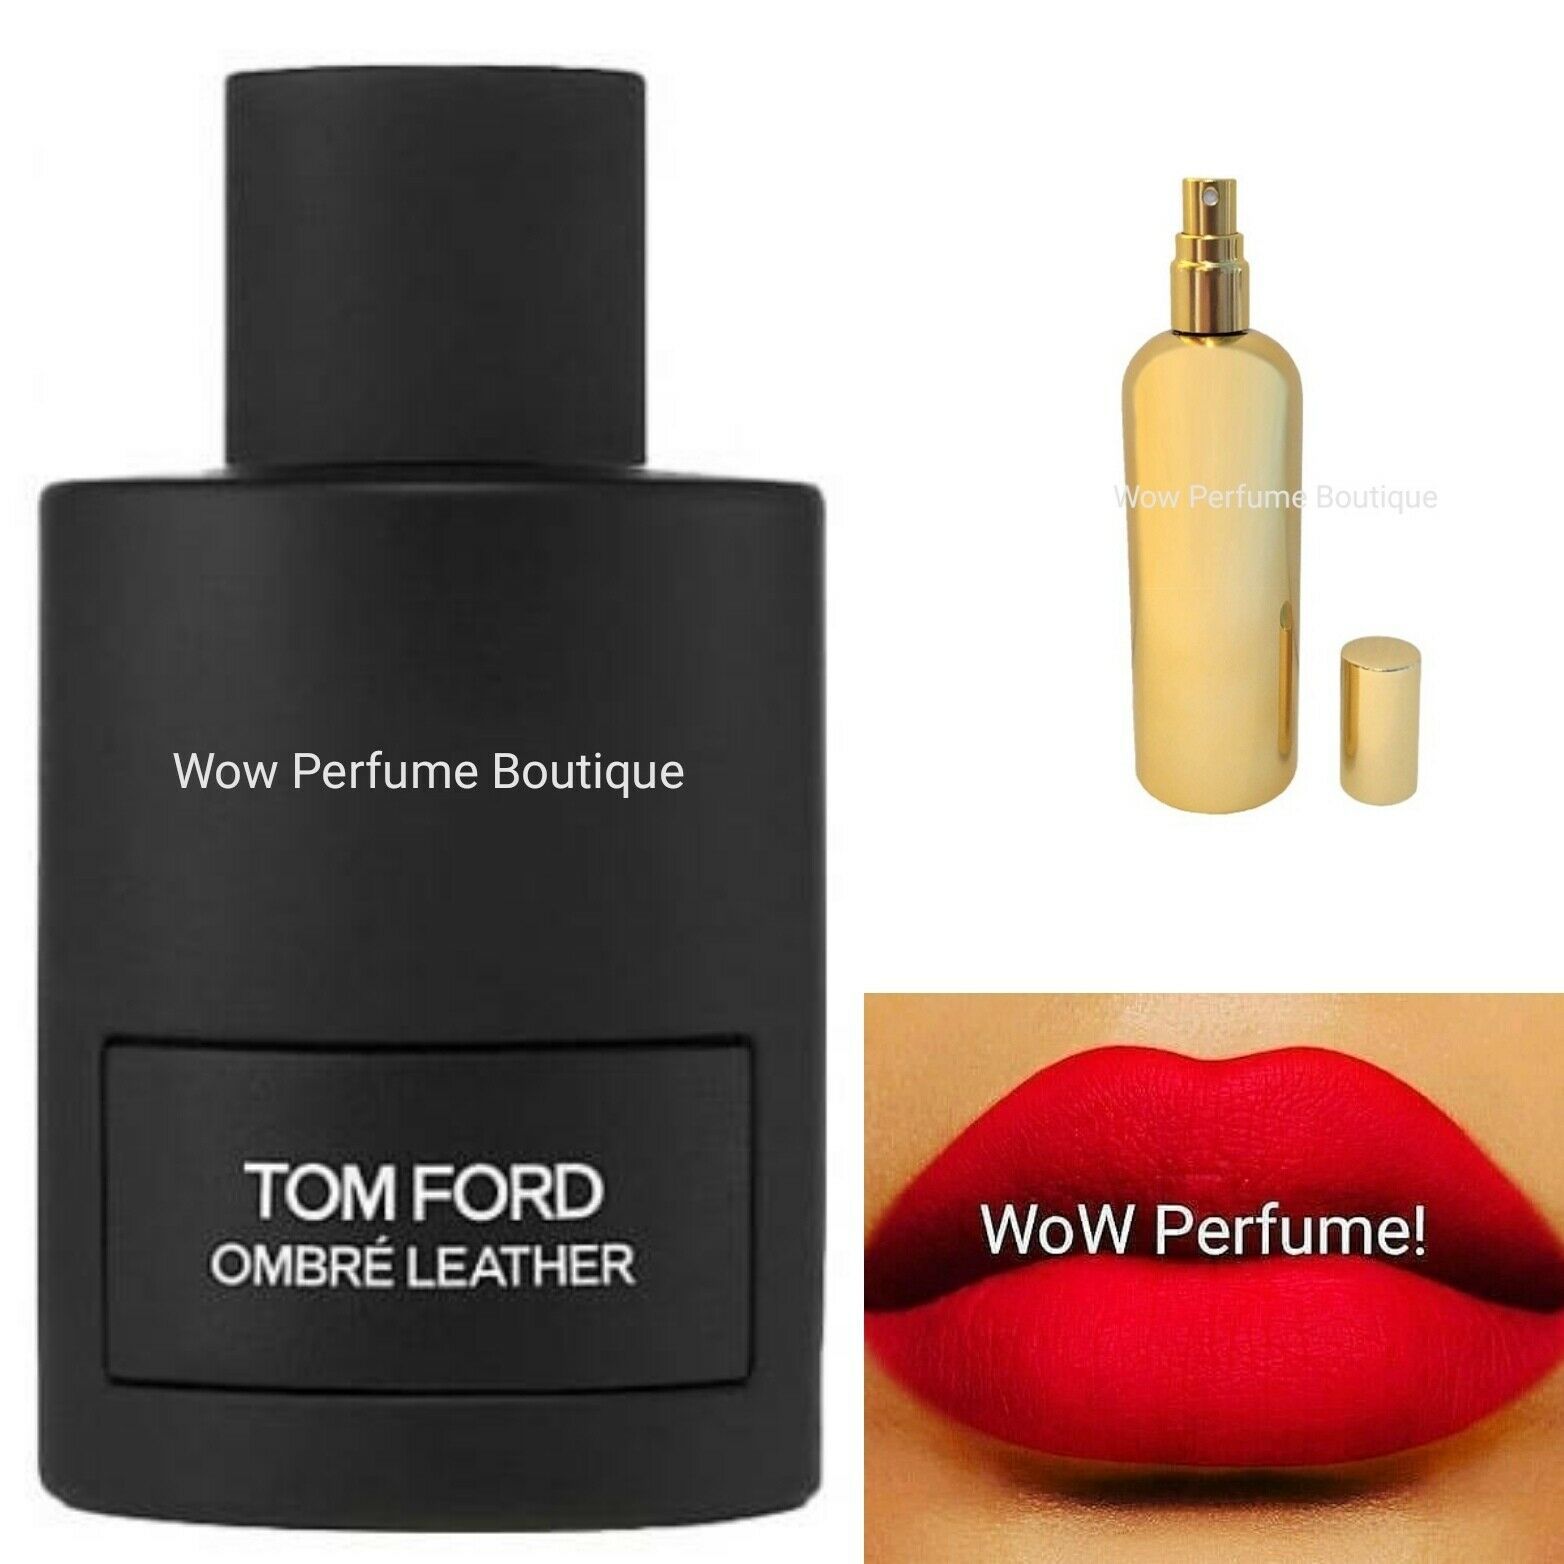 OMBRE LEATHER Tom Ford for women and men Decanted, 1.7fl.oz EDP, Spray